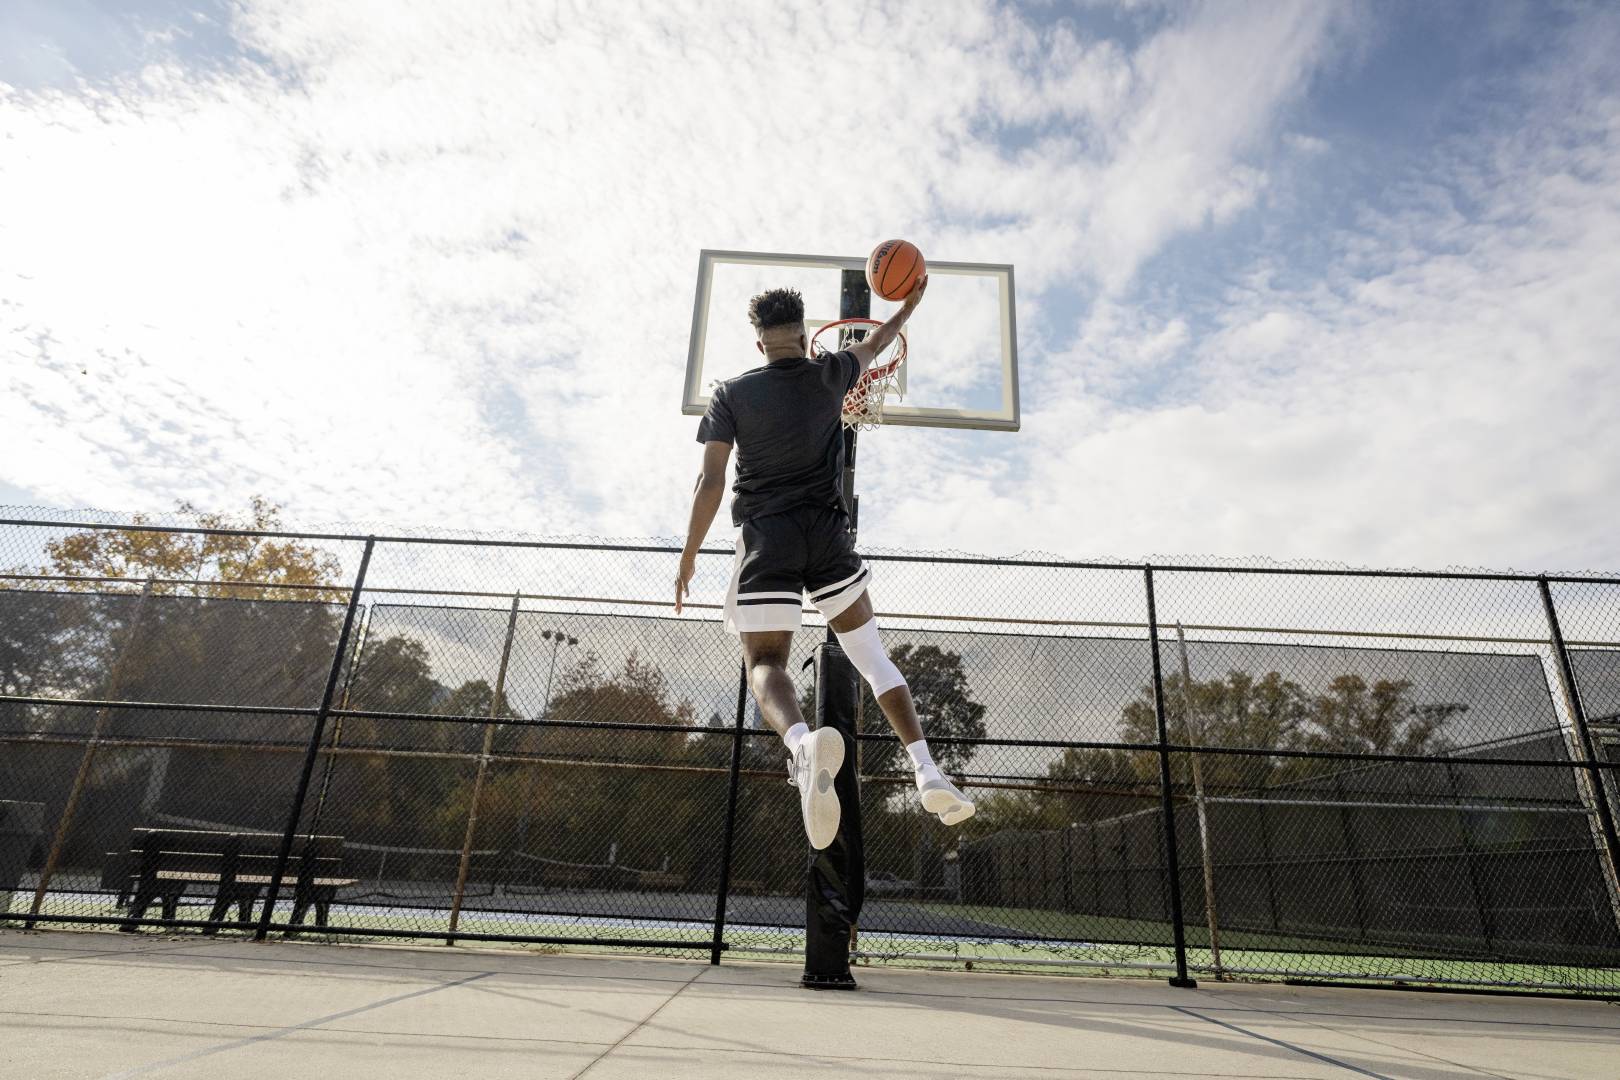 Basketball players with a white knee band during the Dunking on a streetball field